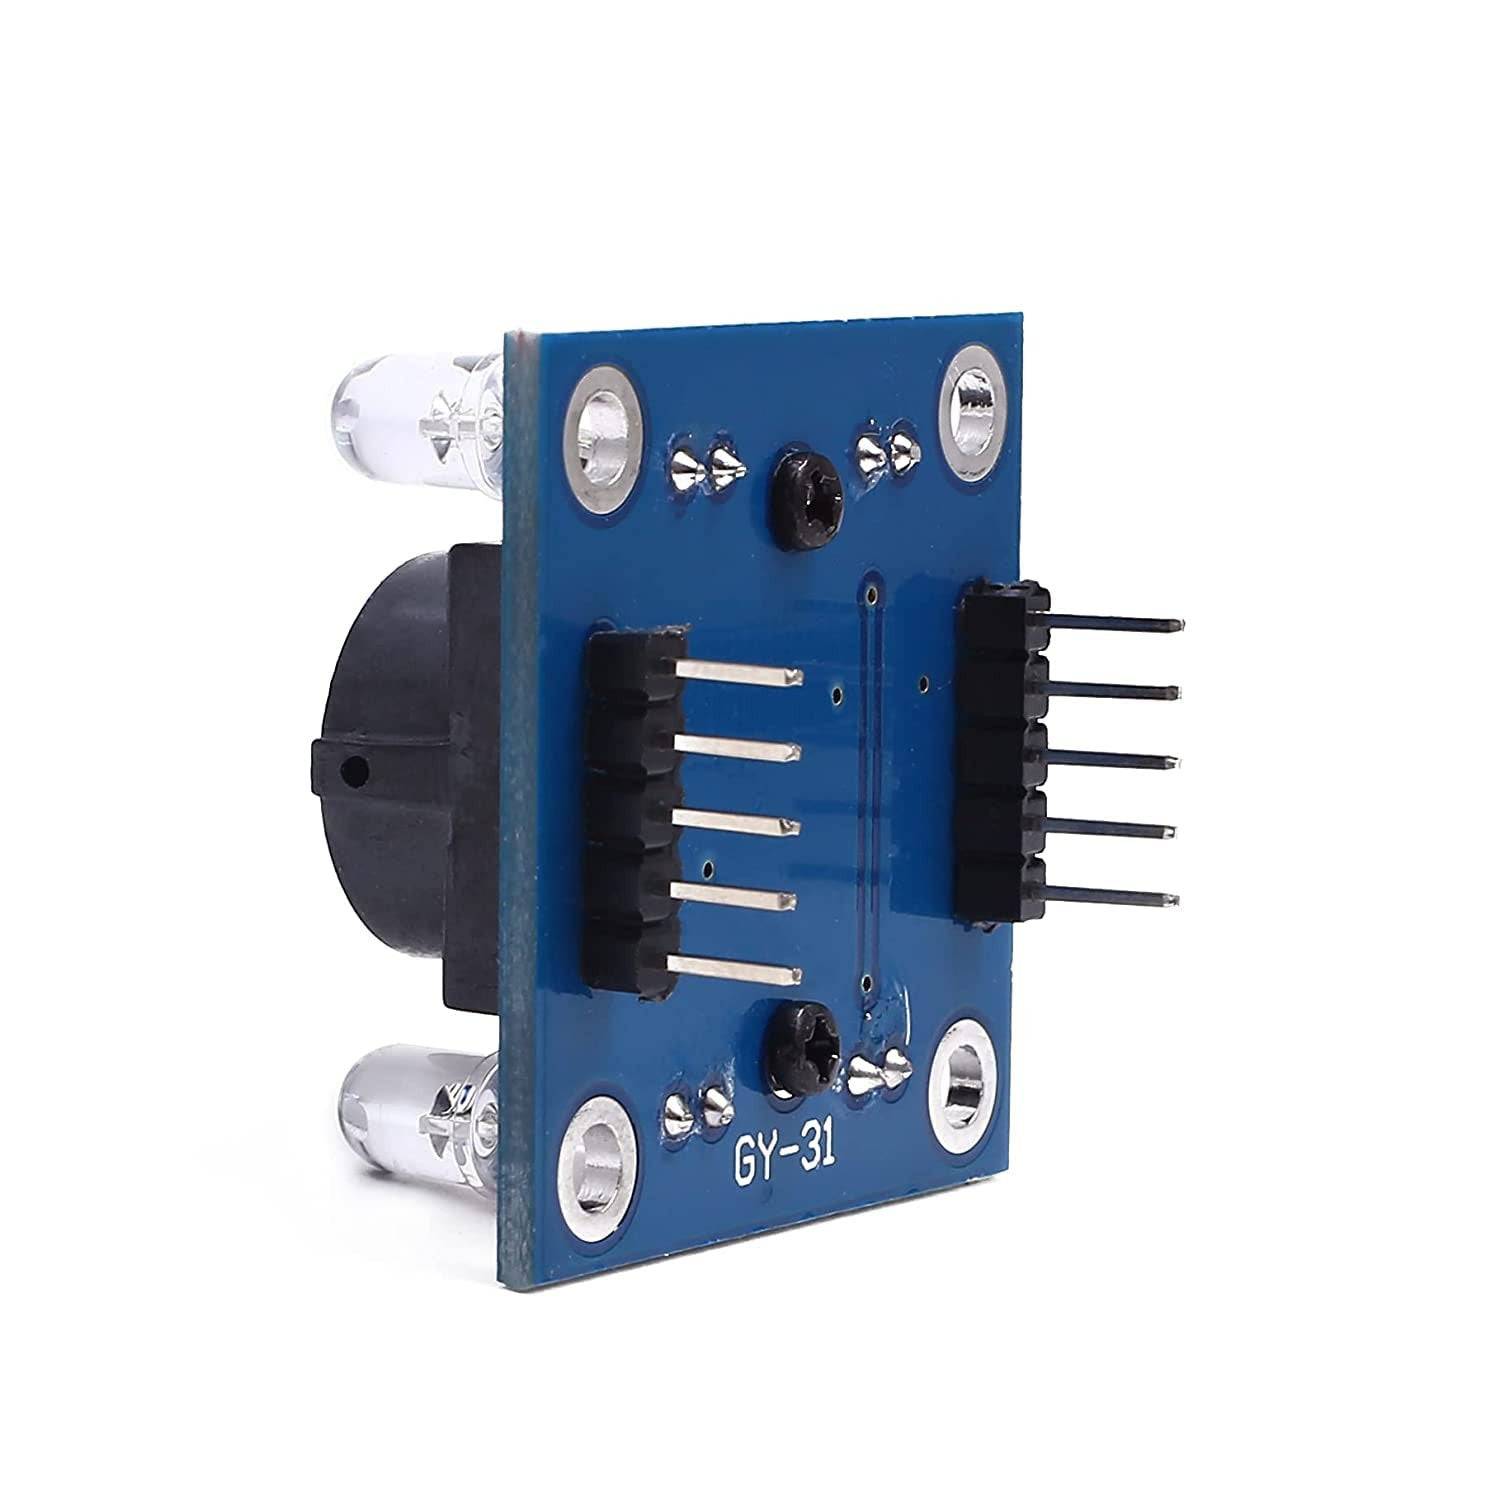 TCS230 TCS3200 Detector Module GY-31 Color Recognition Sensor for Compatible with Arduino - QC275 - REES52